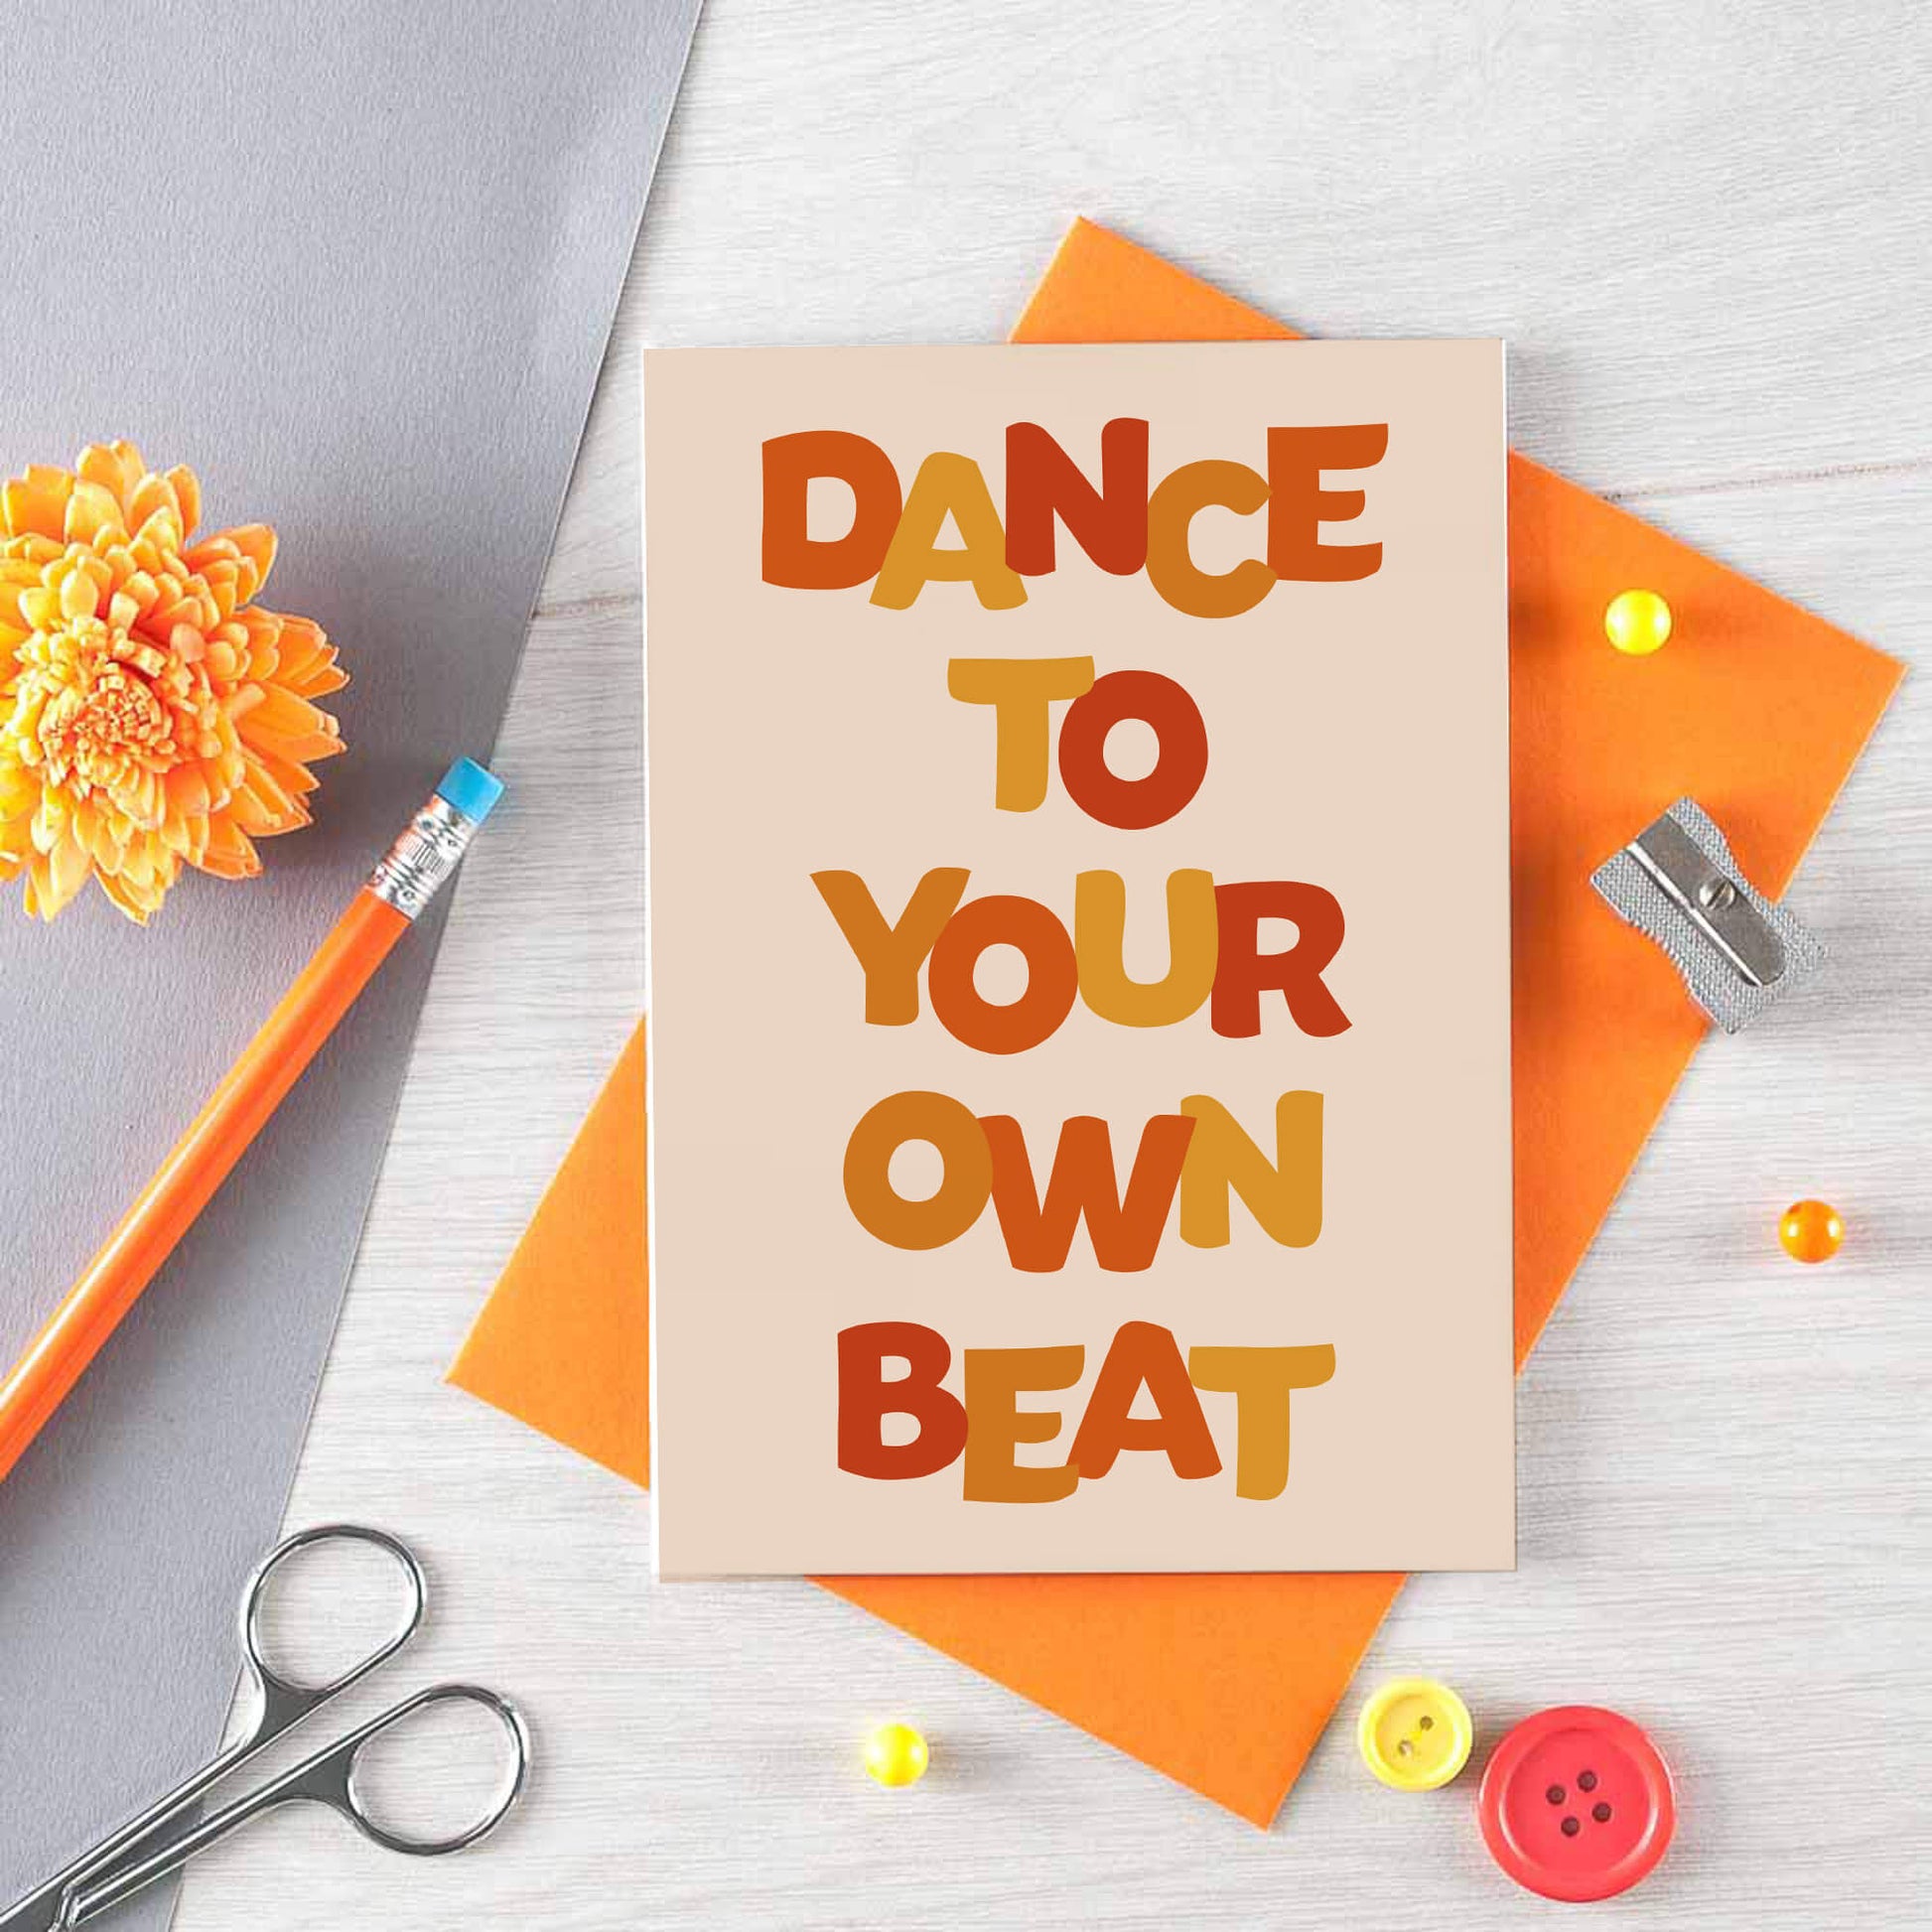 Dance To Your Own Beat by SixElevenCreations. Product Code SE0601A6